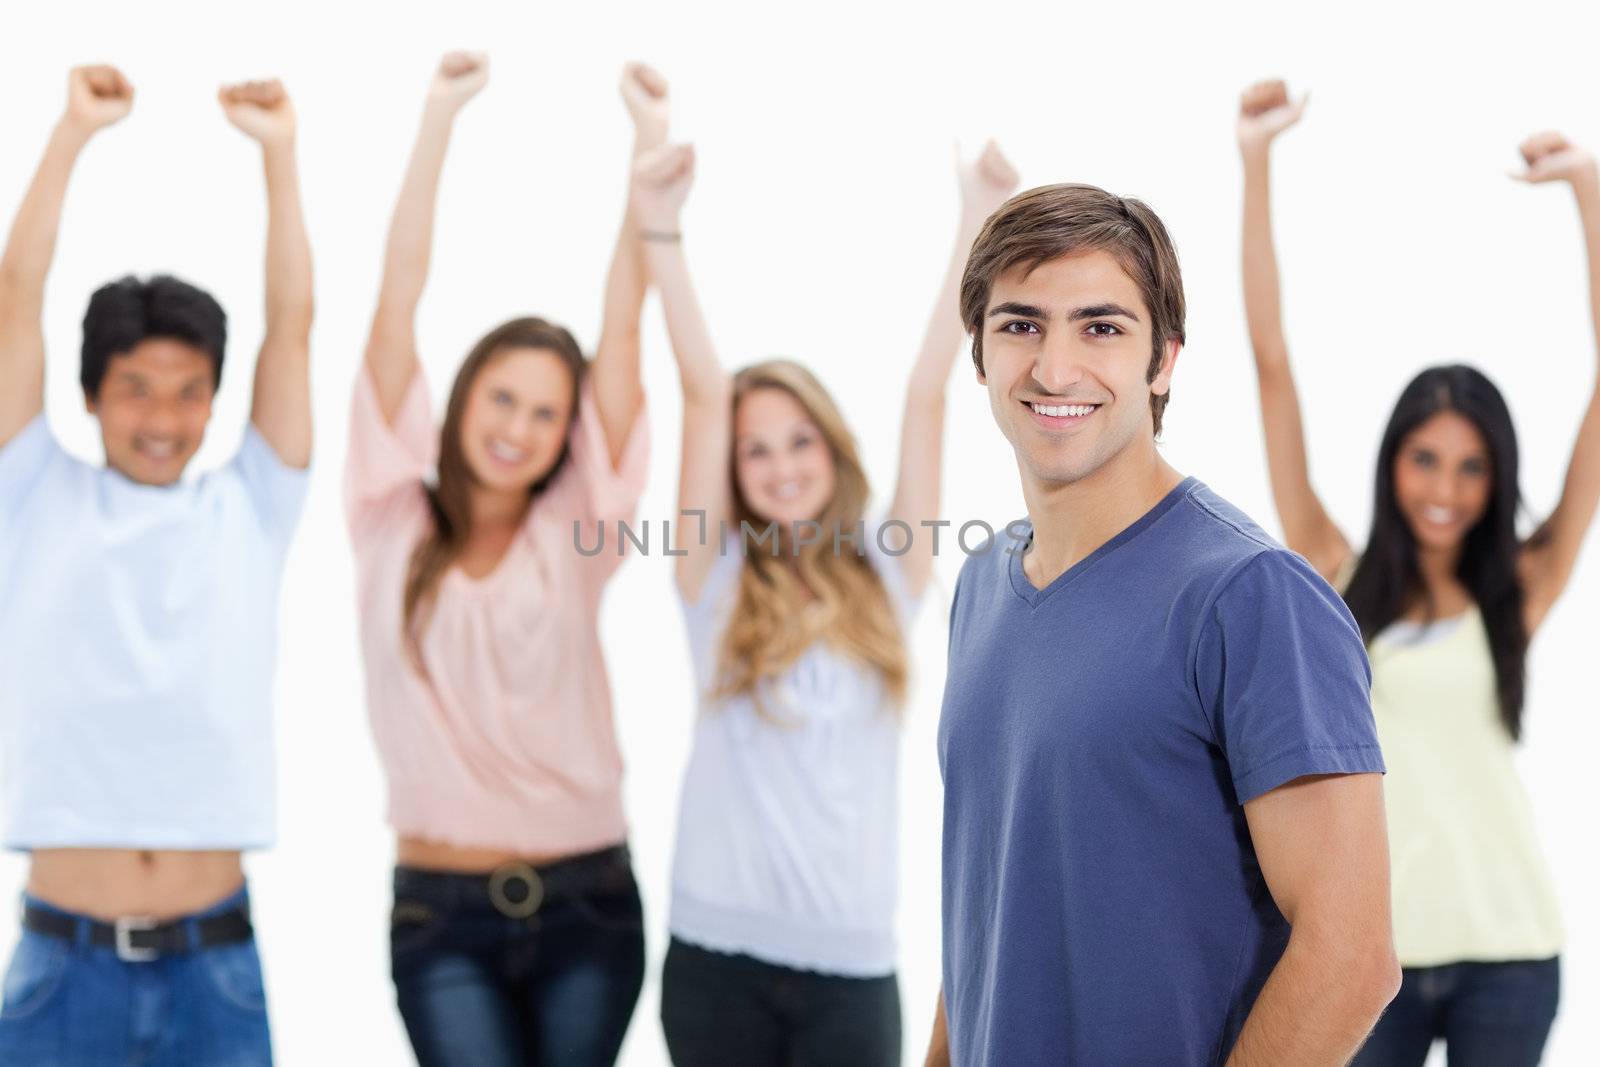 Smiling man with people behind him raising their arms by Wavebreakmedia